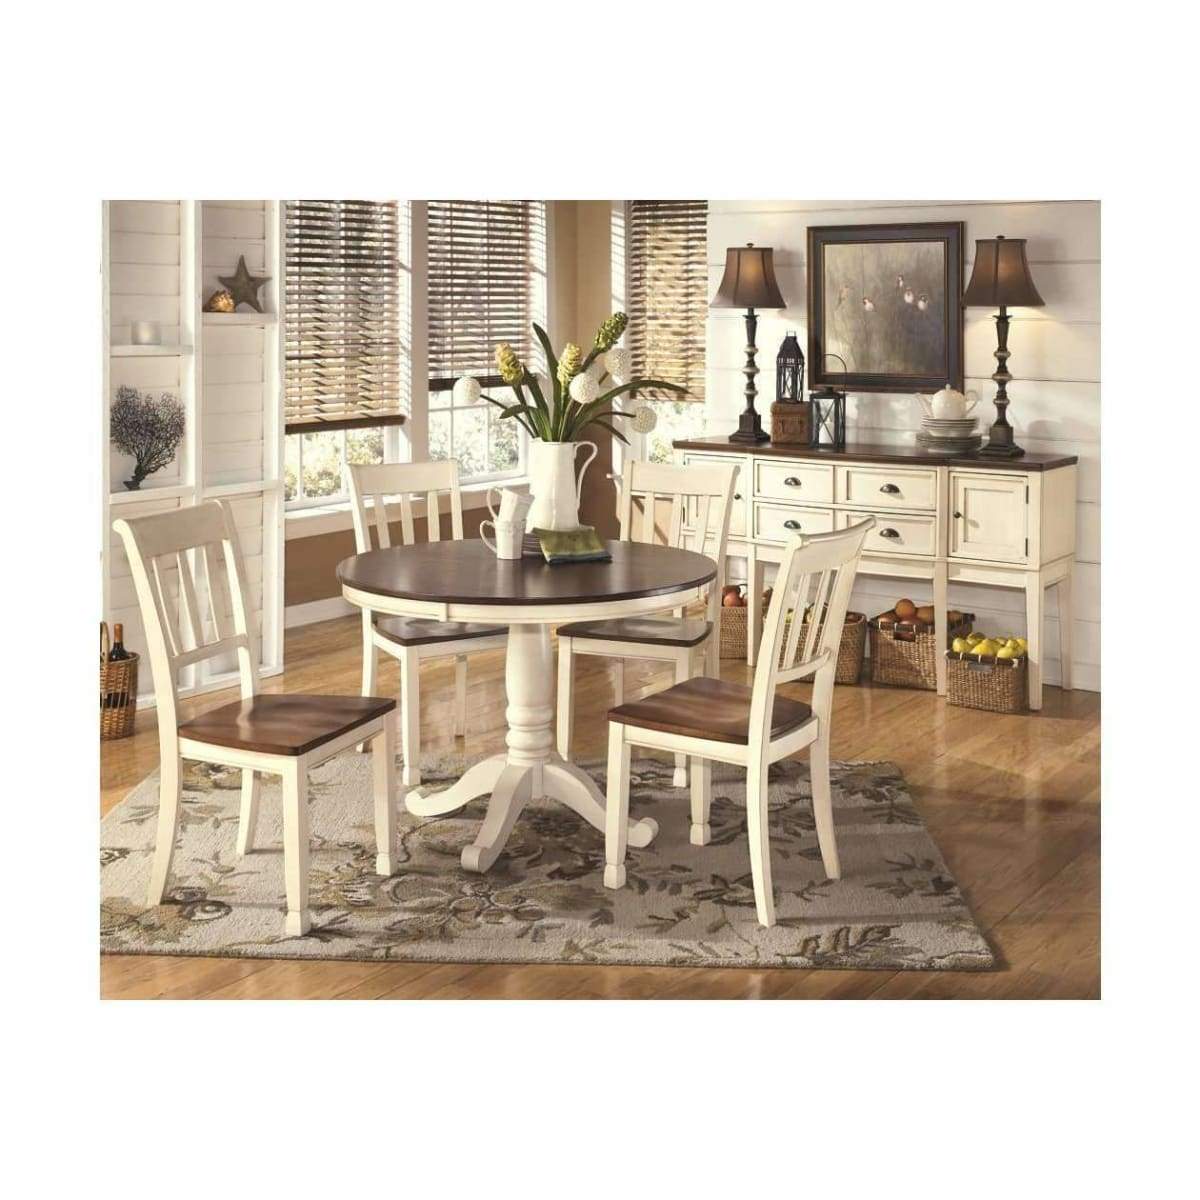 Whitesburg Round Dining Table With 4 Chairs - DININGCOUNTERHEIGHT